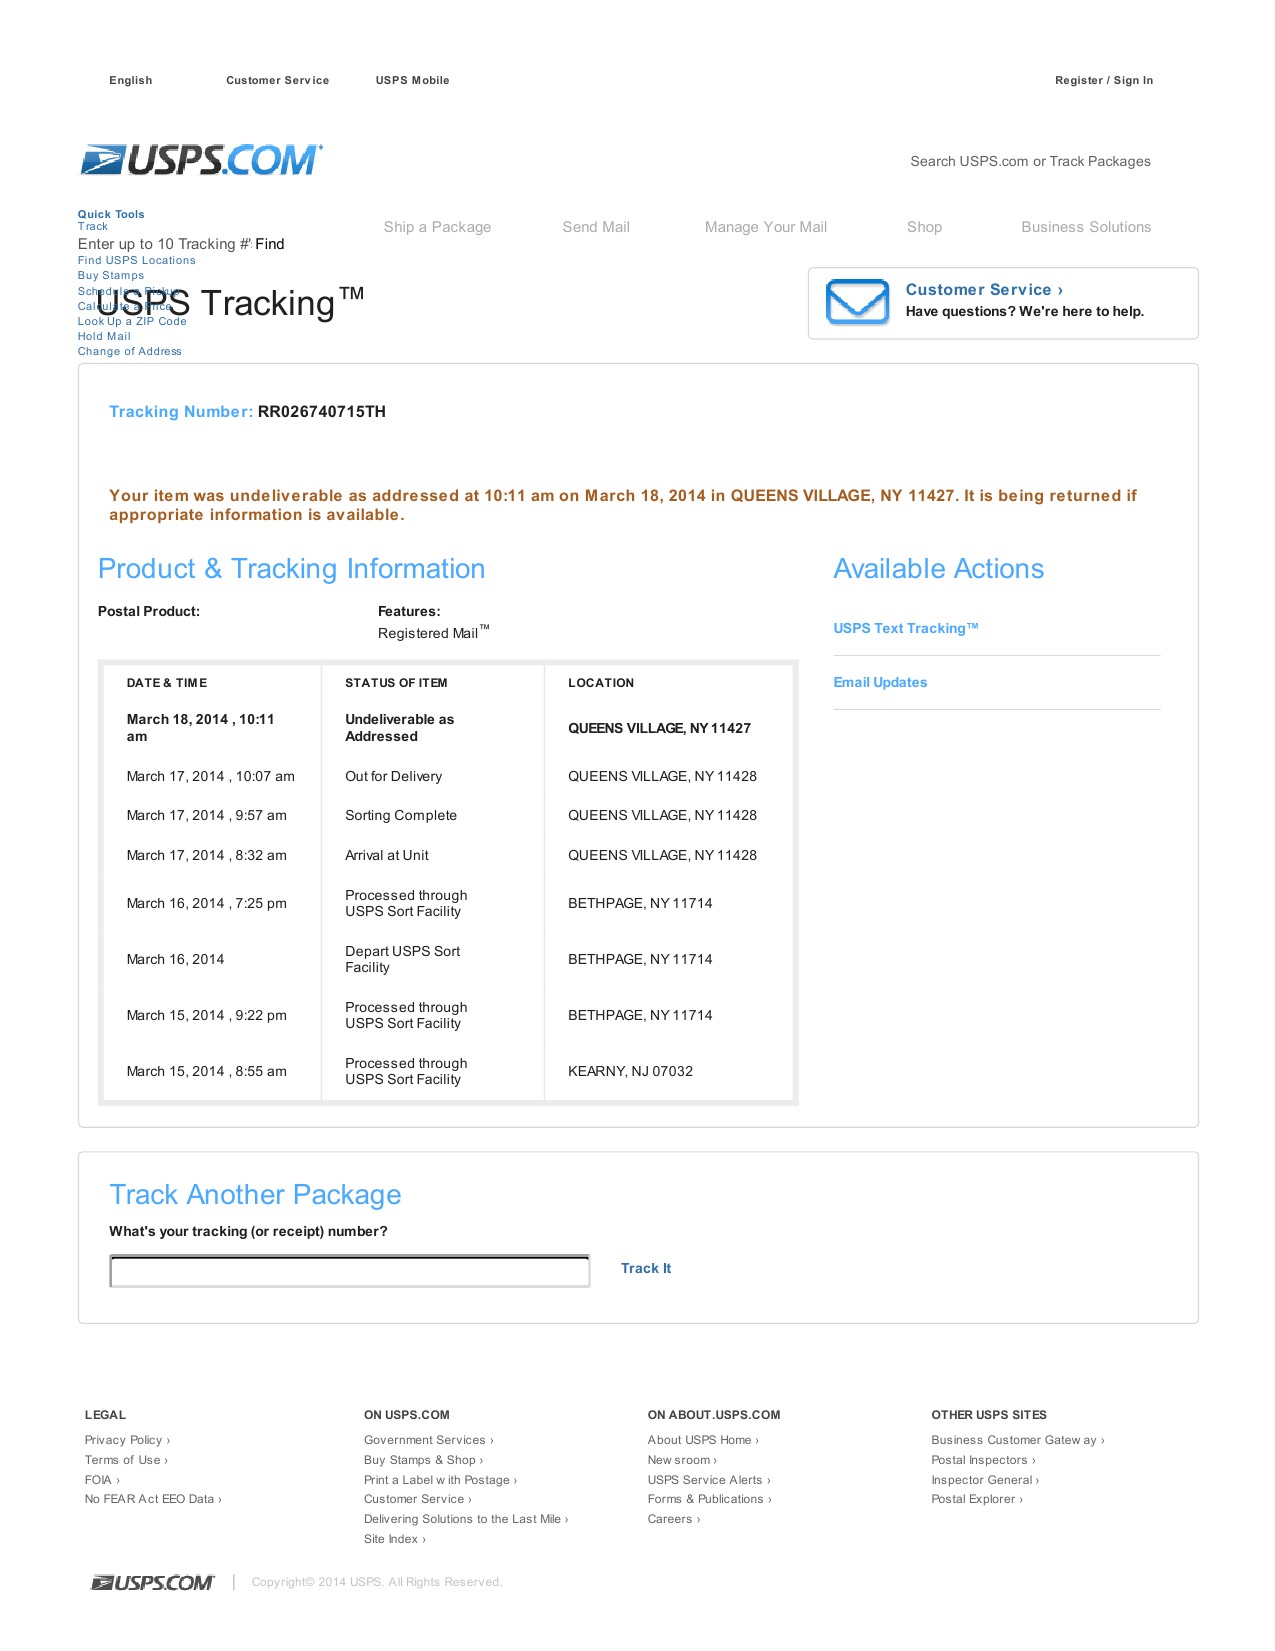 The Real Tracking information showing it was not delivered.